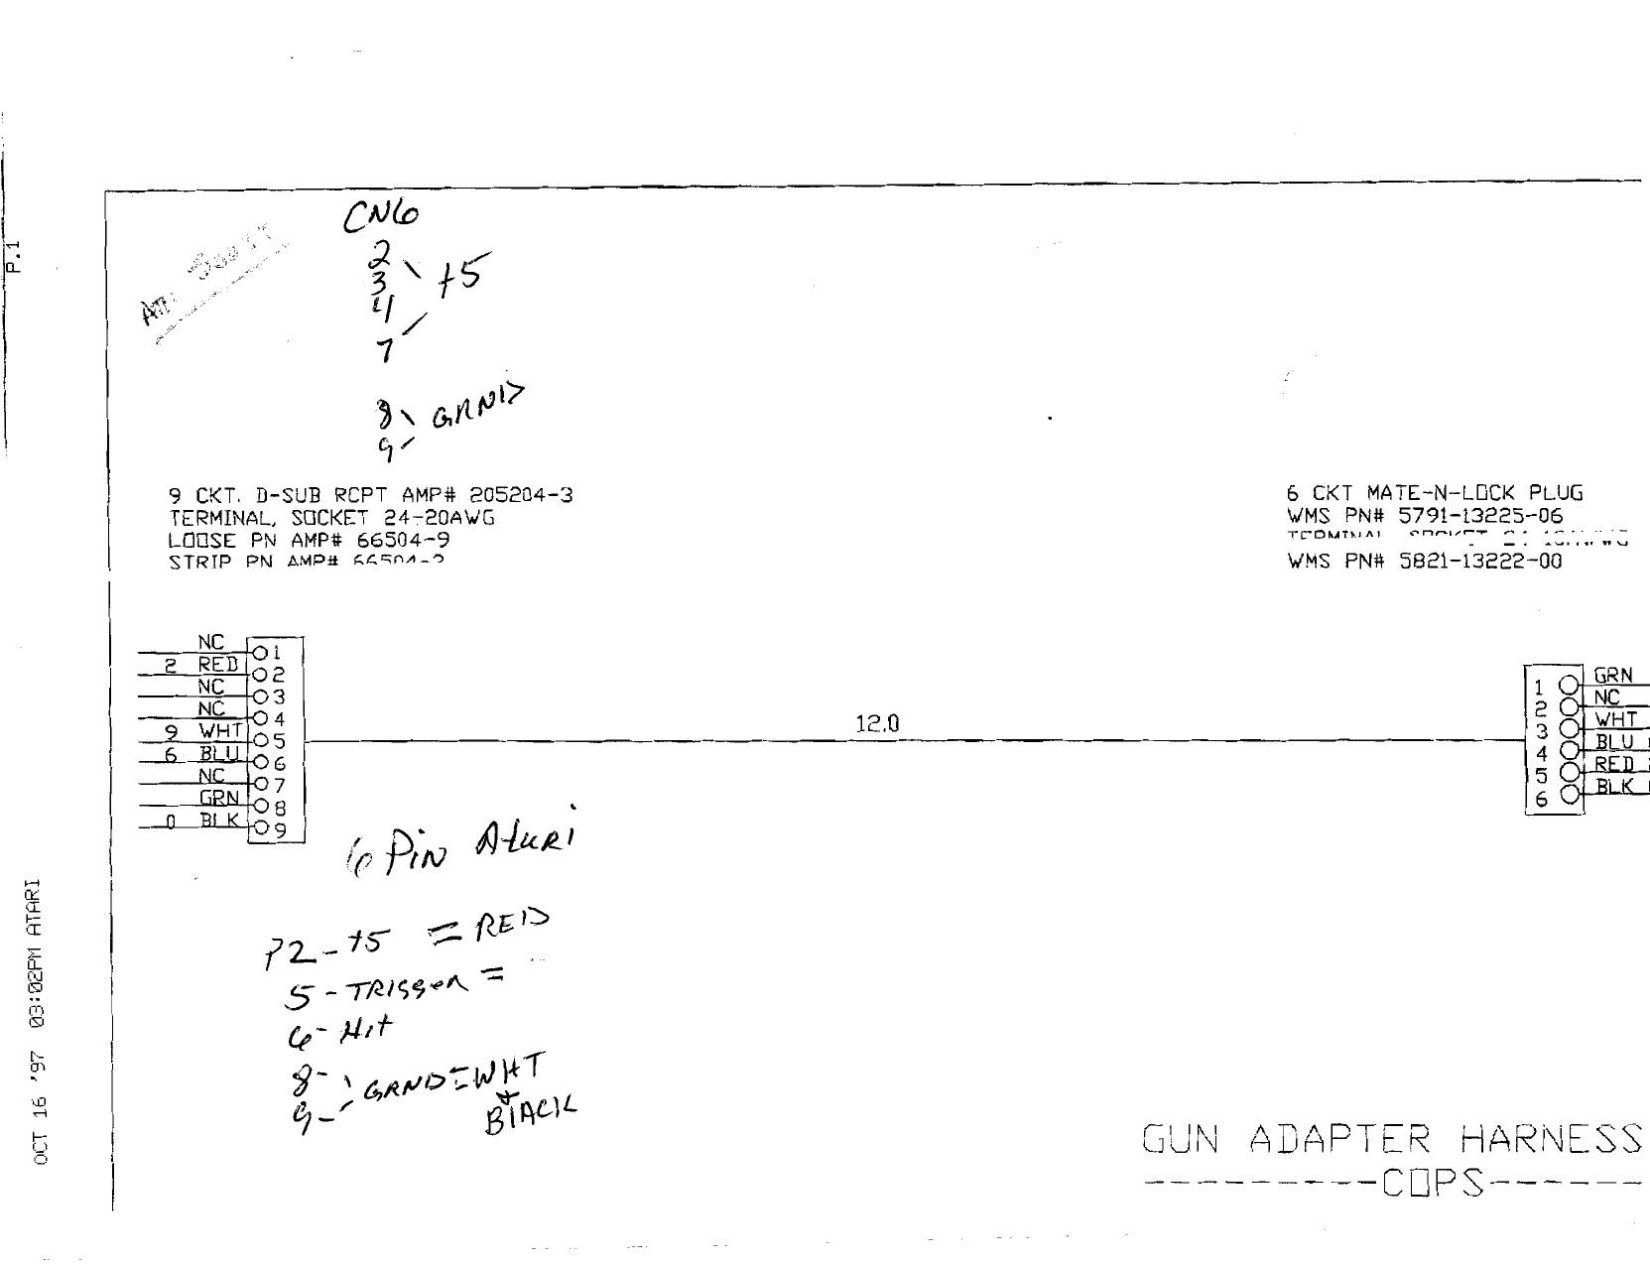 Cops Misc Pages faxed by Atari